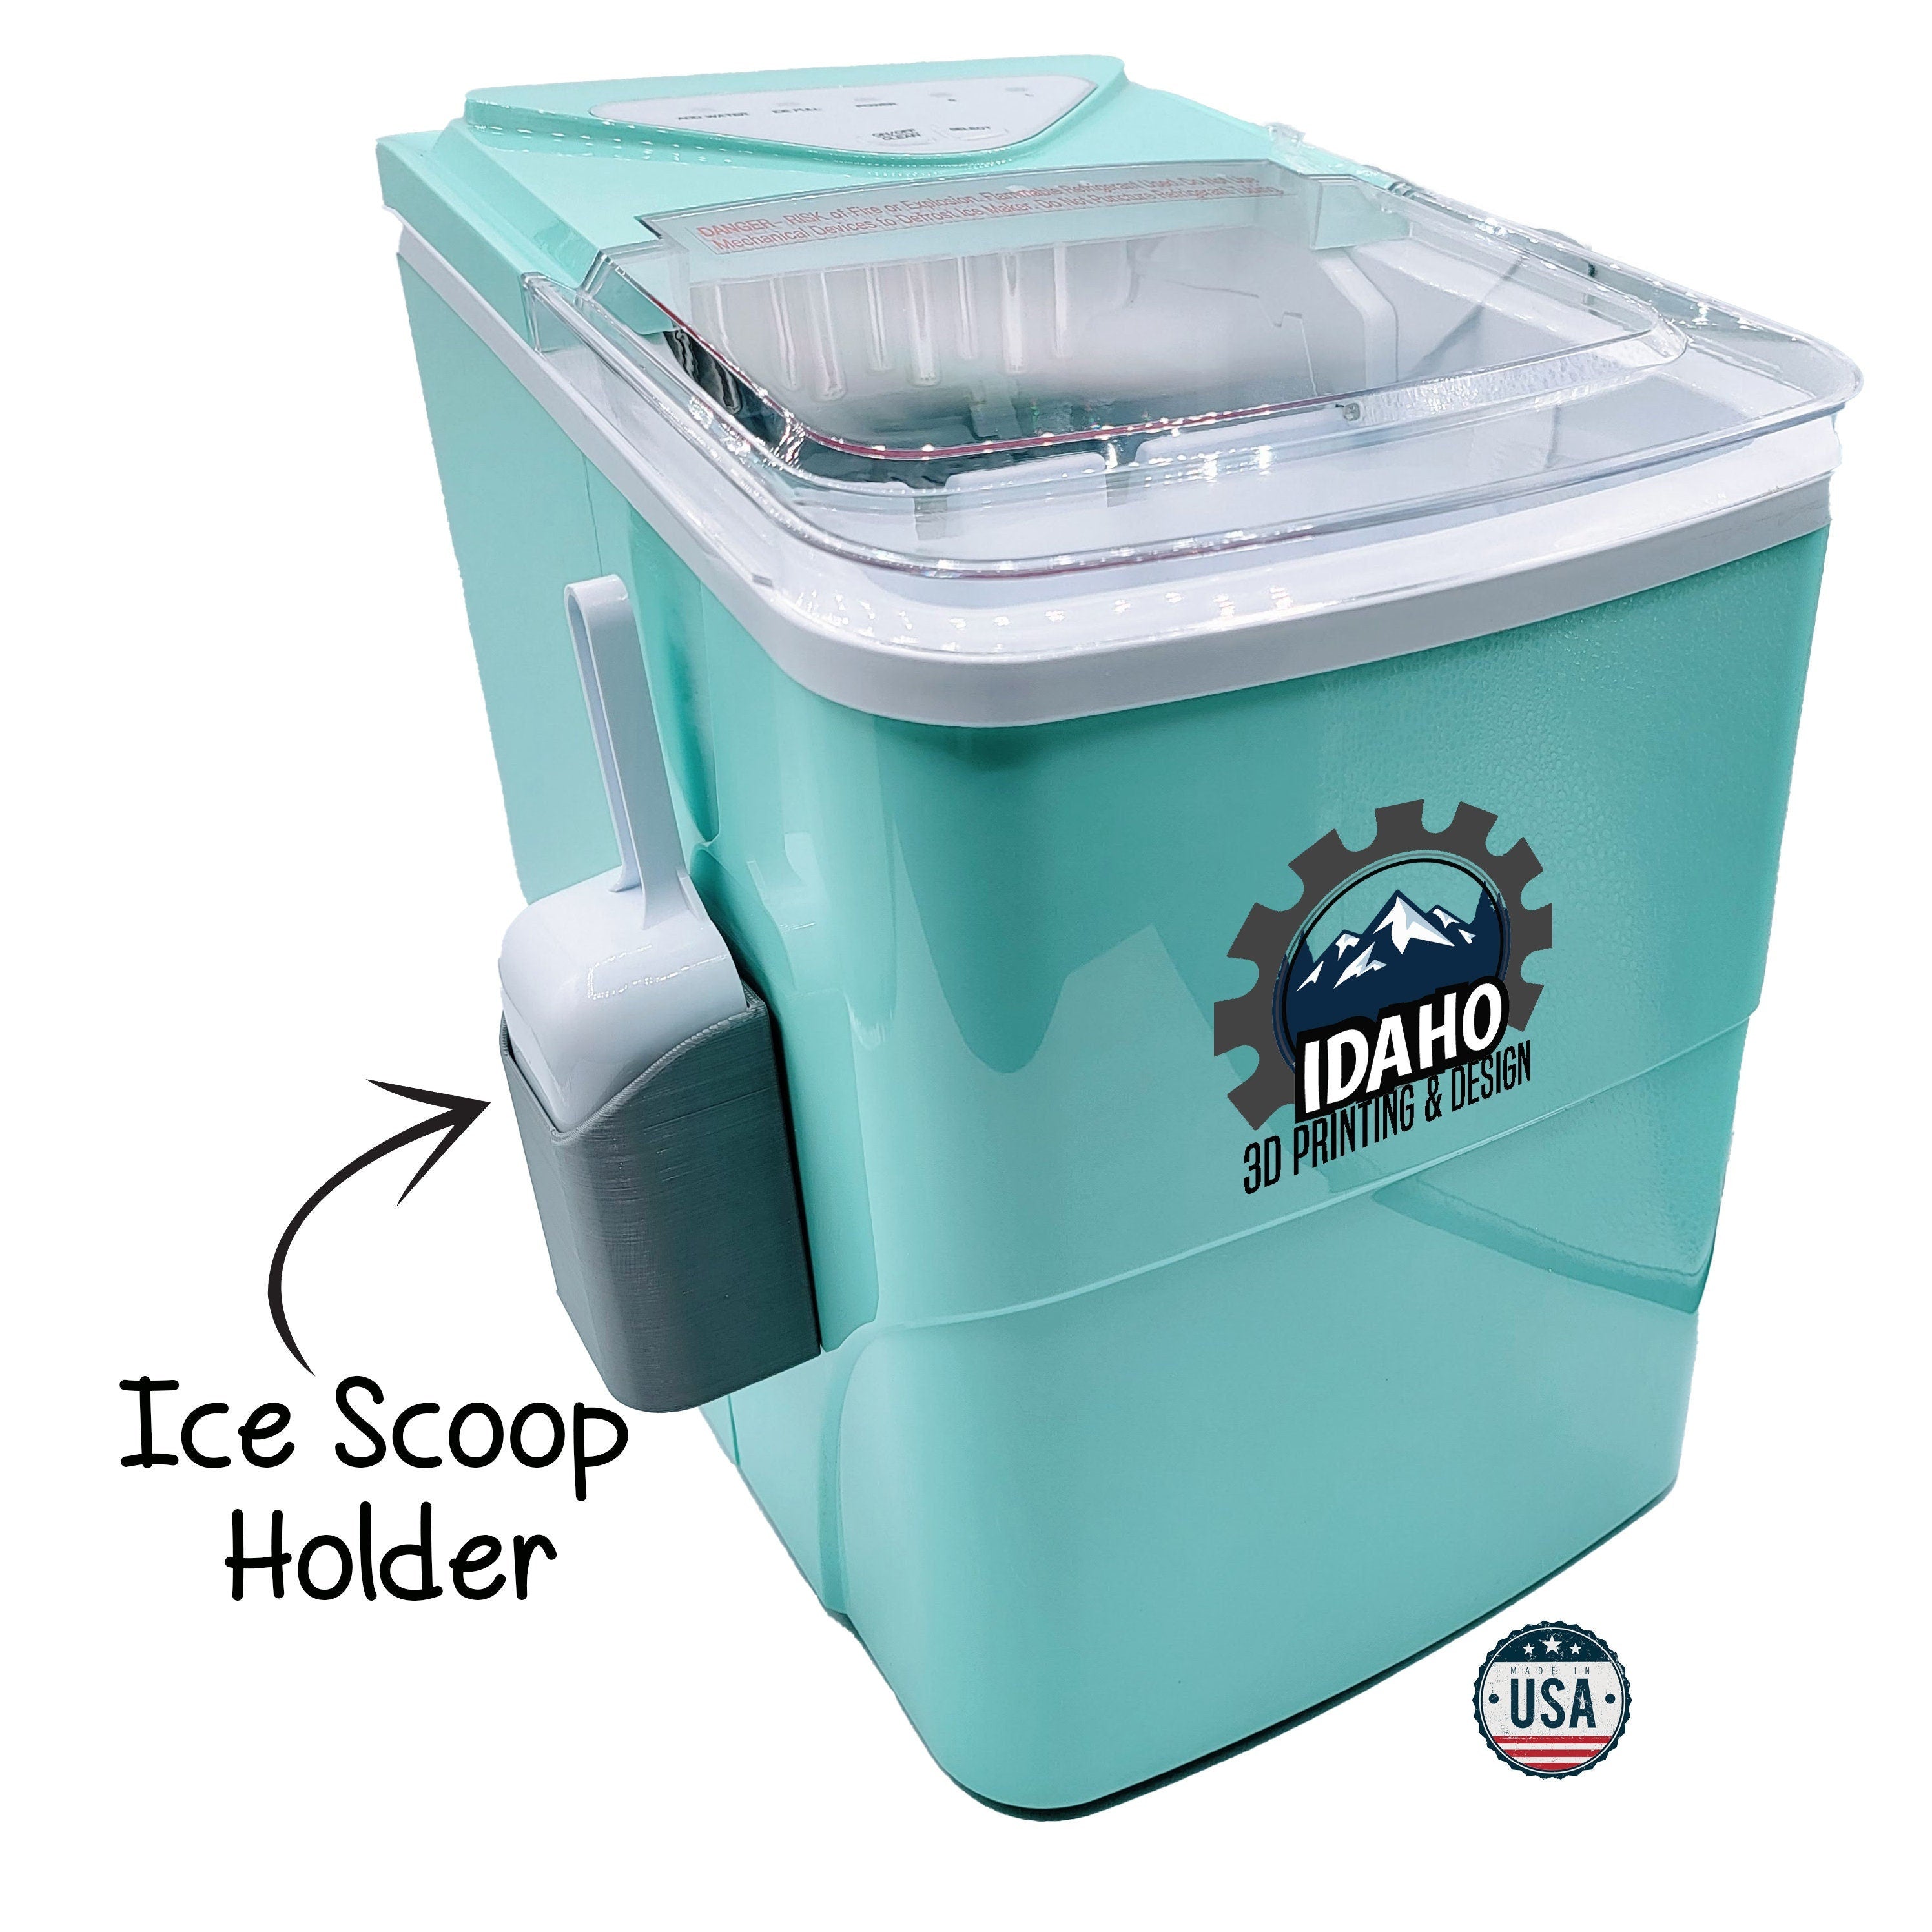 Ice Scoop Holder - Fits Various Countertop Ice Makers *Does not